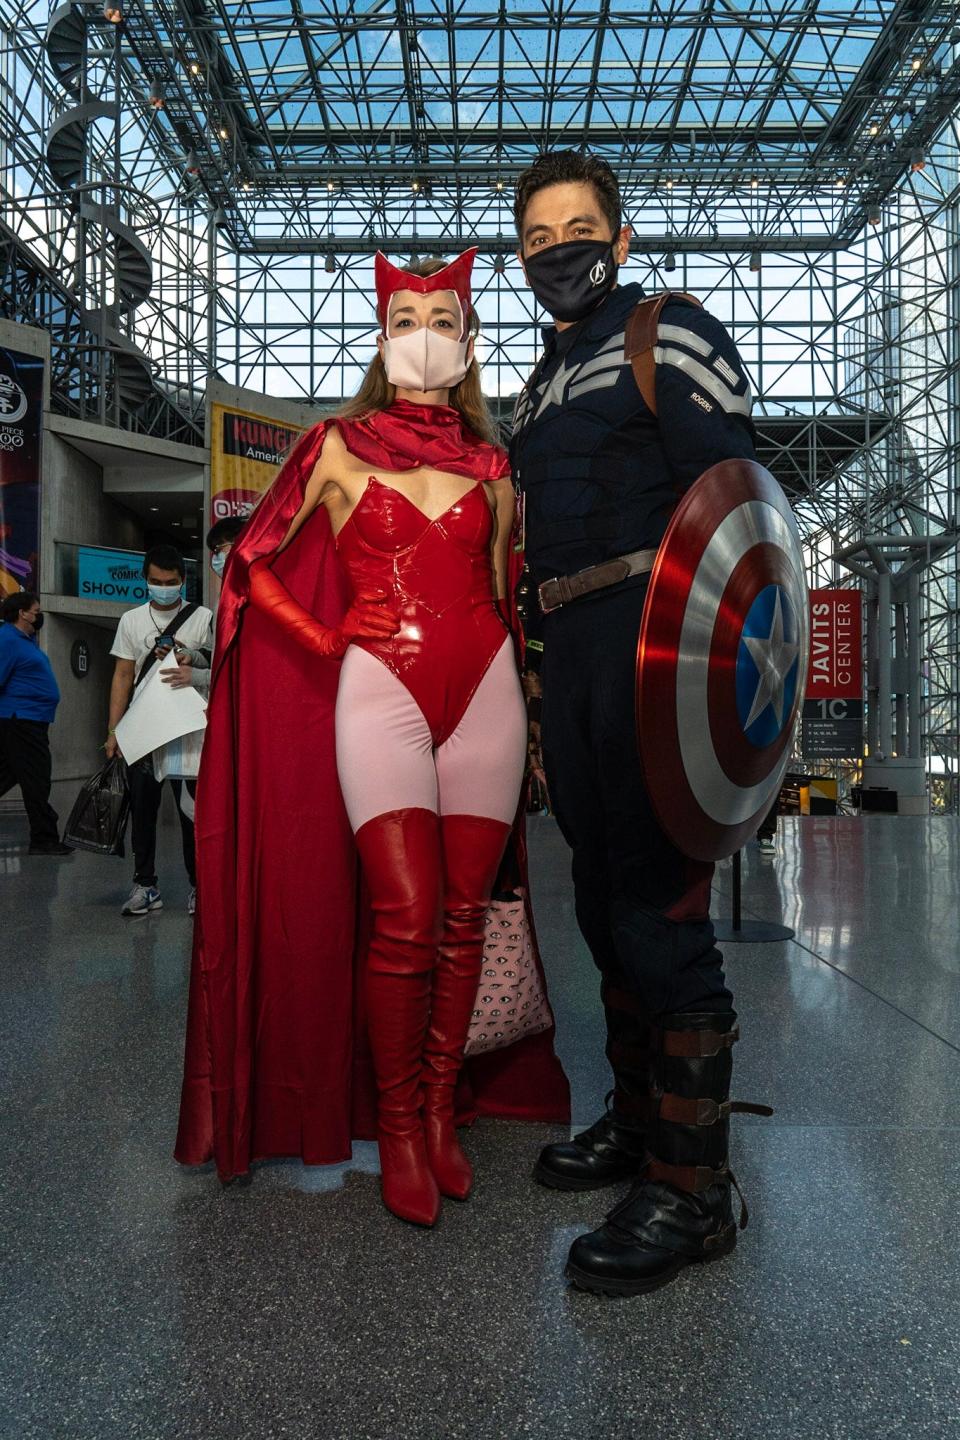 Two cosplayers dressed as Scarlet Witch and Captain America at New York Comic Con 2021.